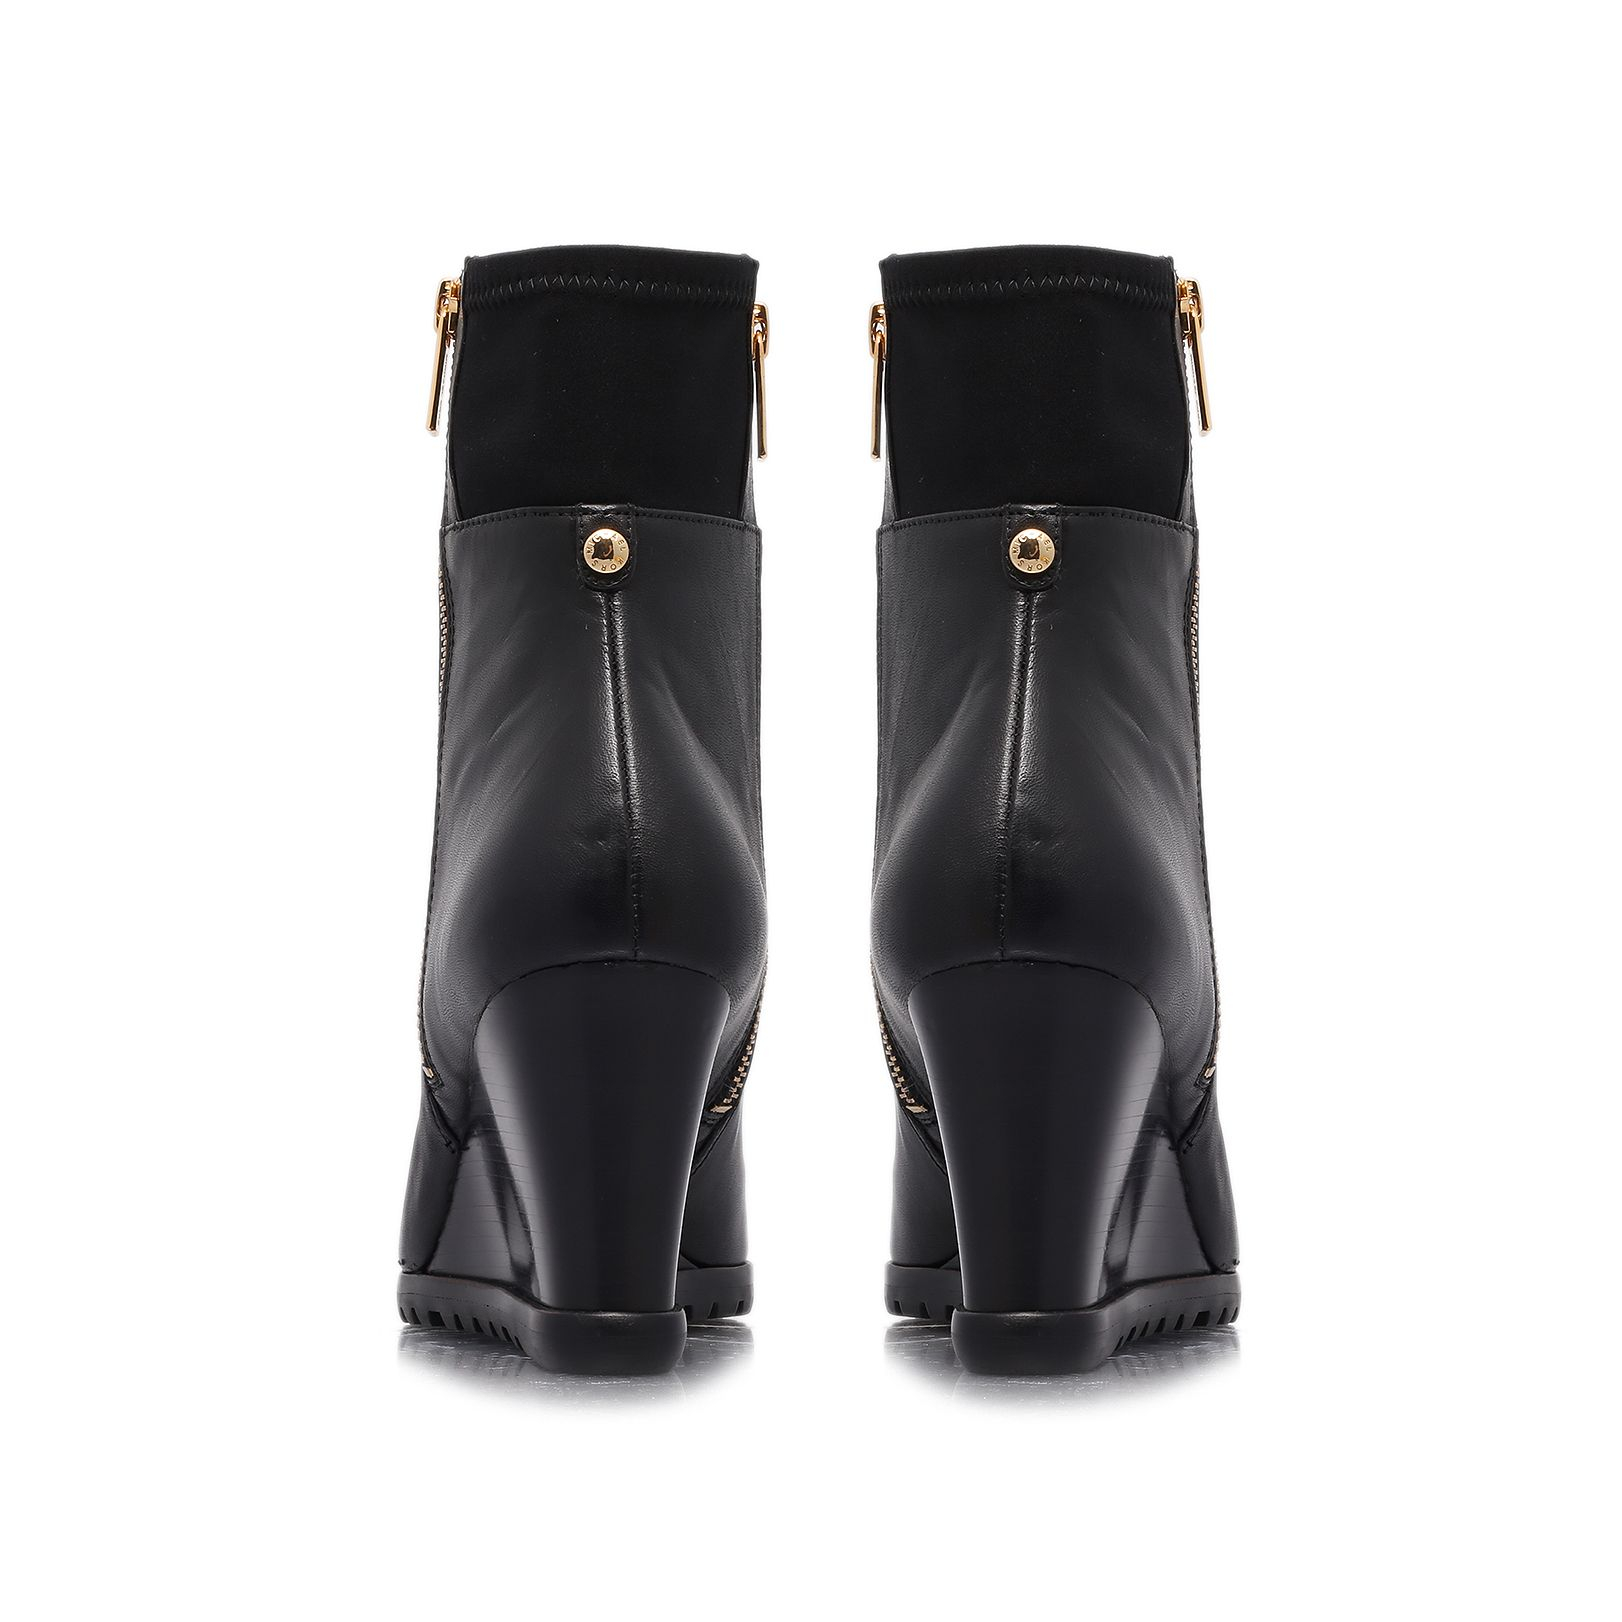 michael kors wedge ankle boots